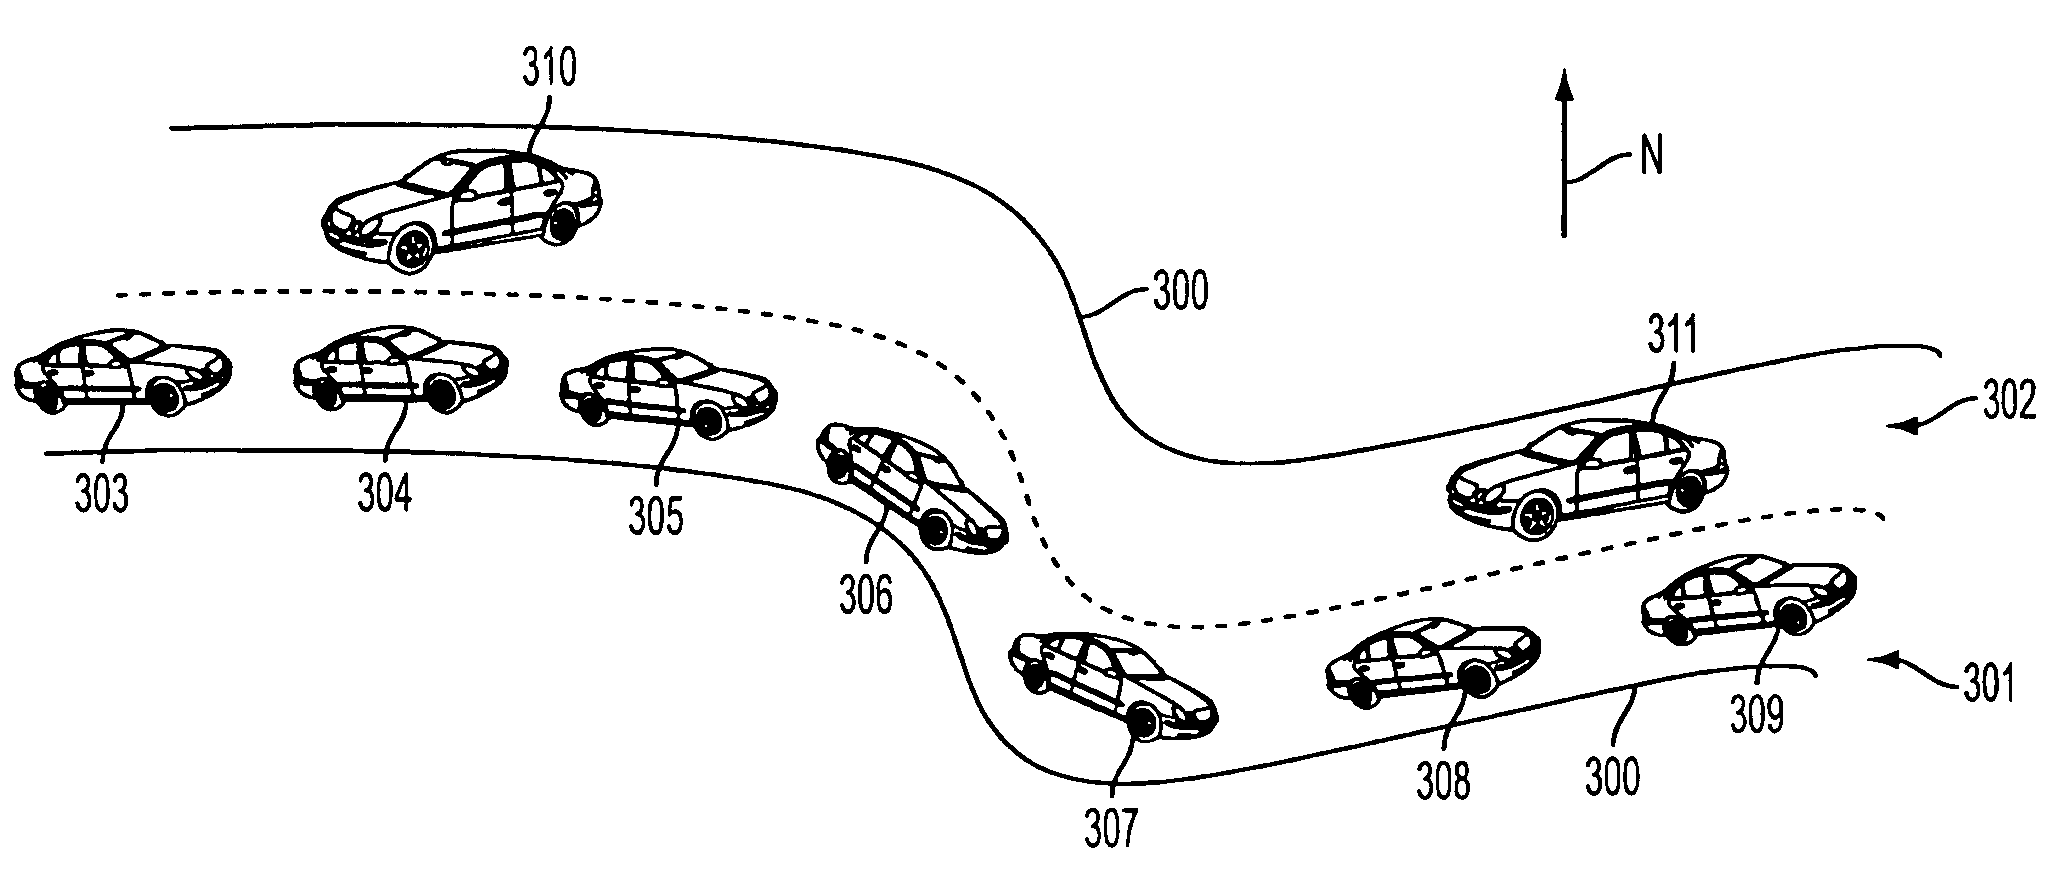 System and method for analyzing traffic flow